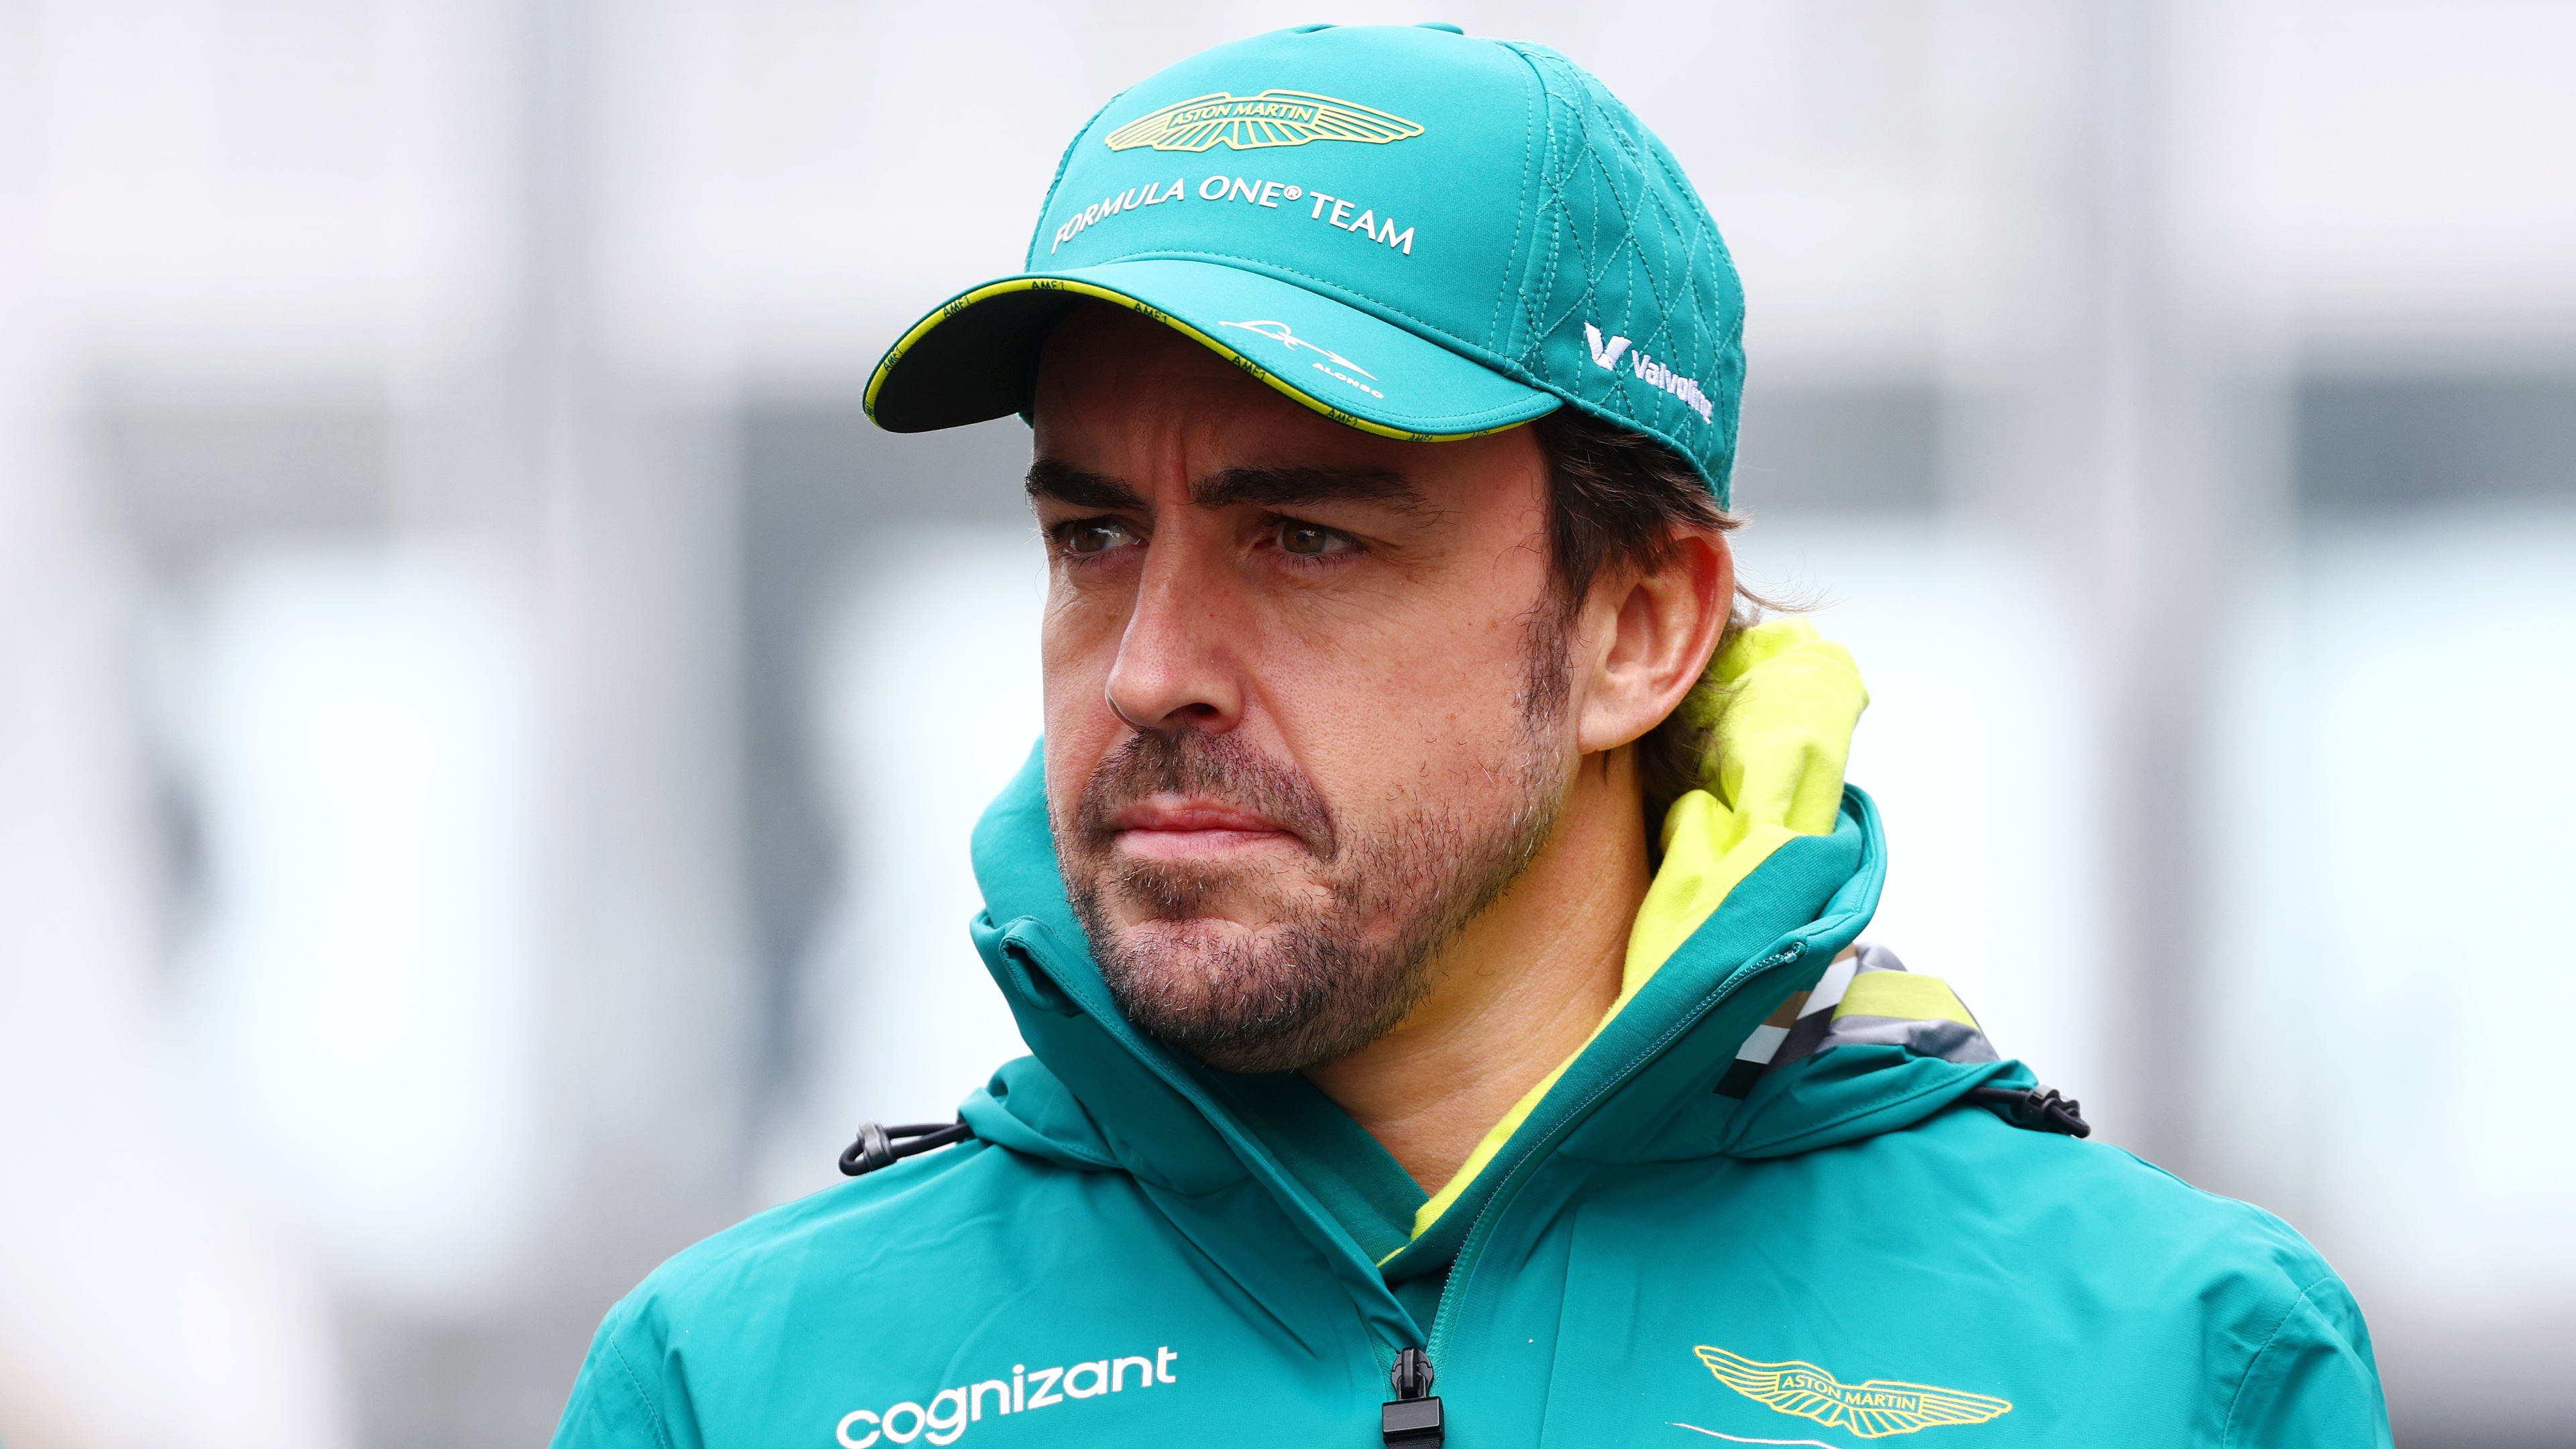 ‘Normally we should be P9’ – Alonso praises Aston Martin for maximising ‘small factors’ to finish P6 in Japan